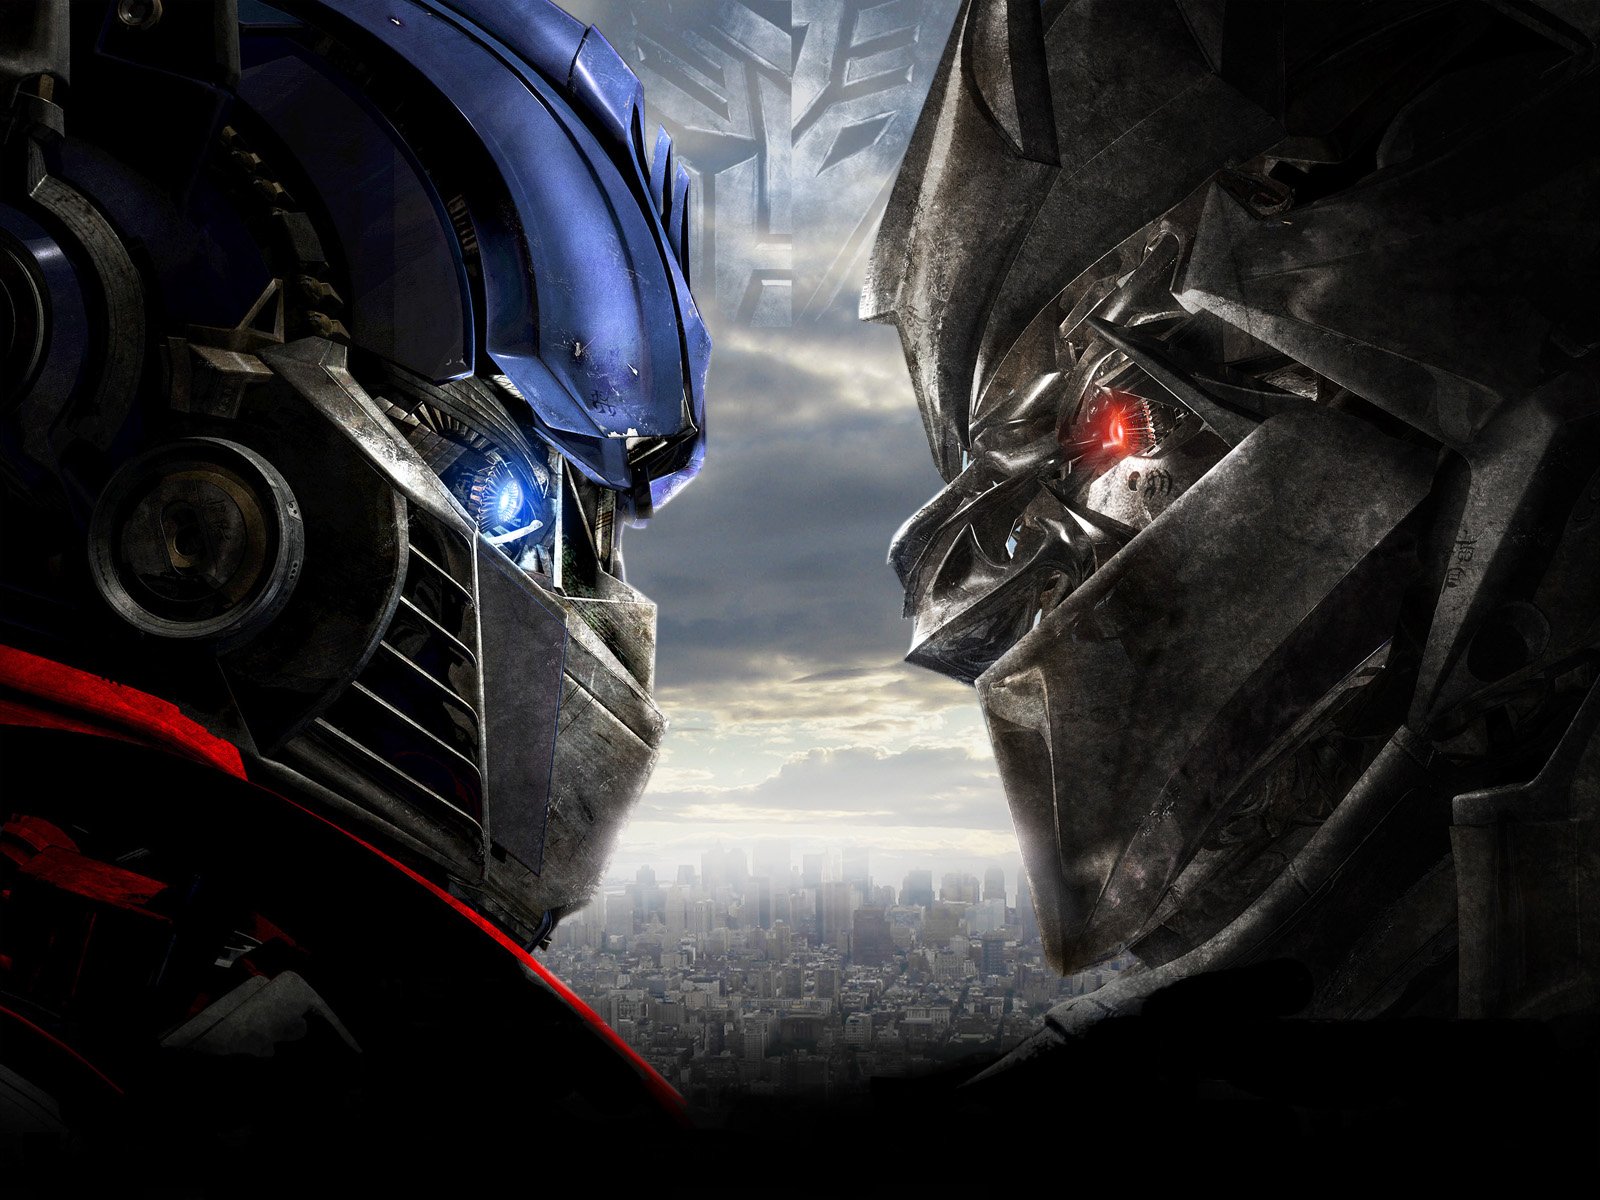 Transformers HD Wallpaper Background Image